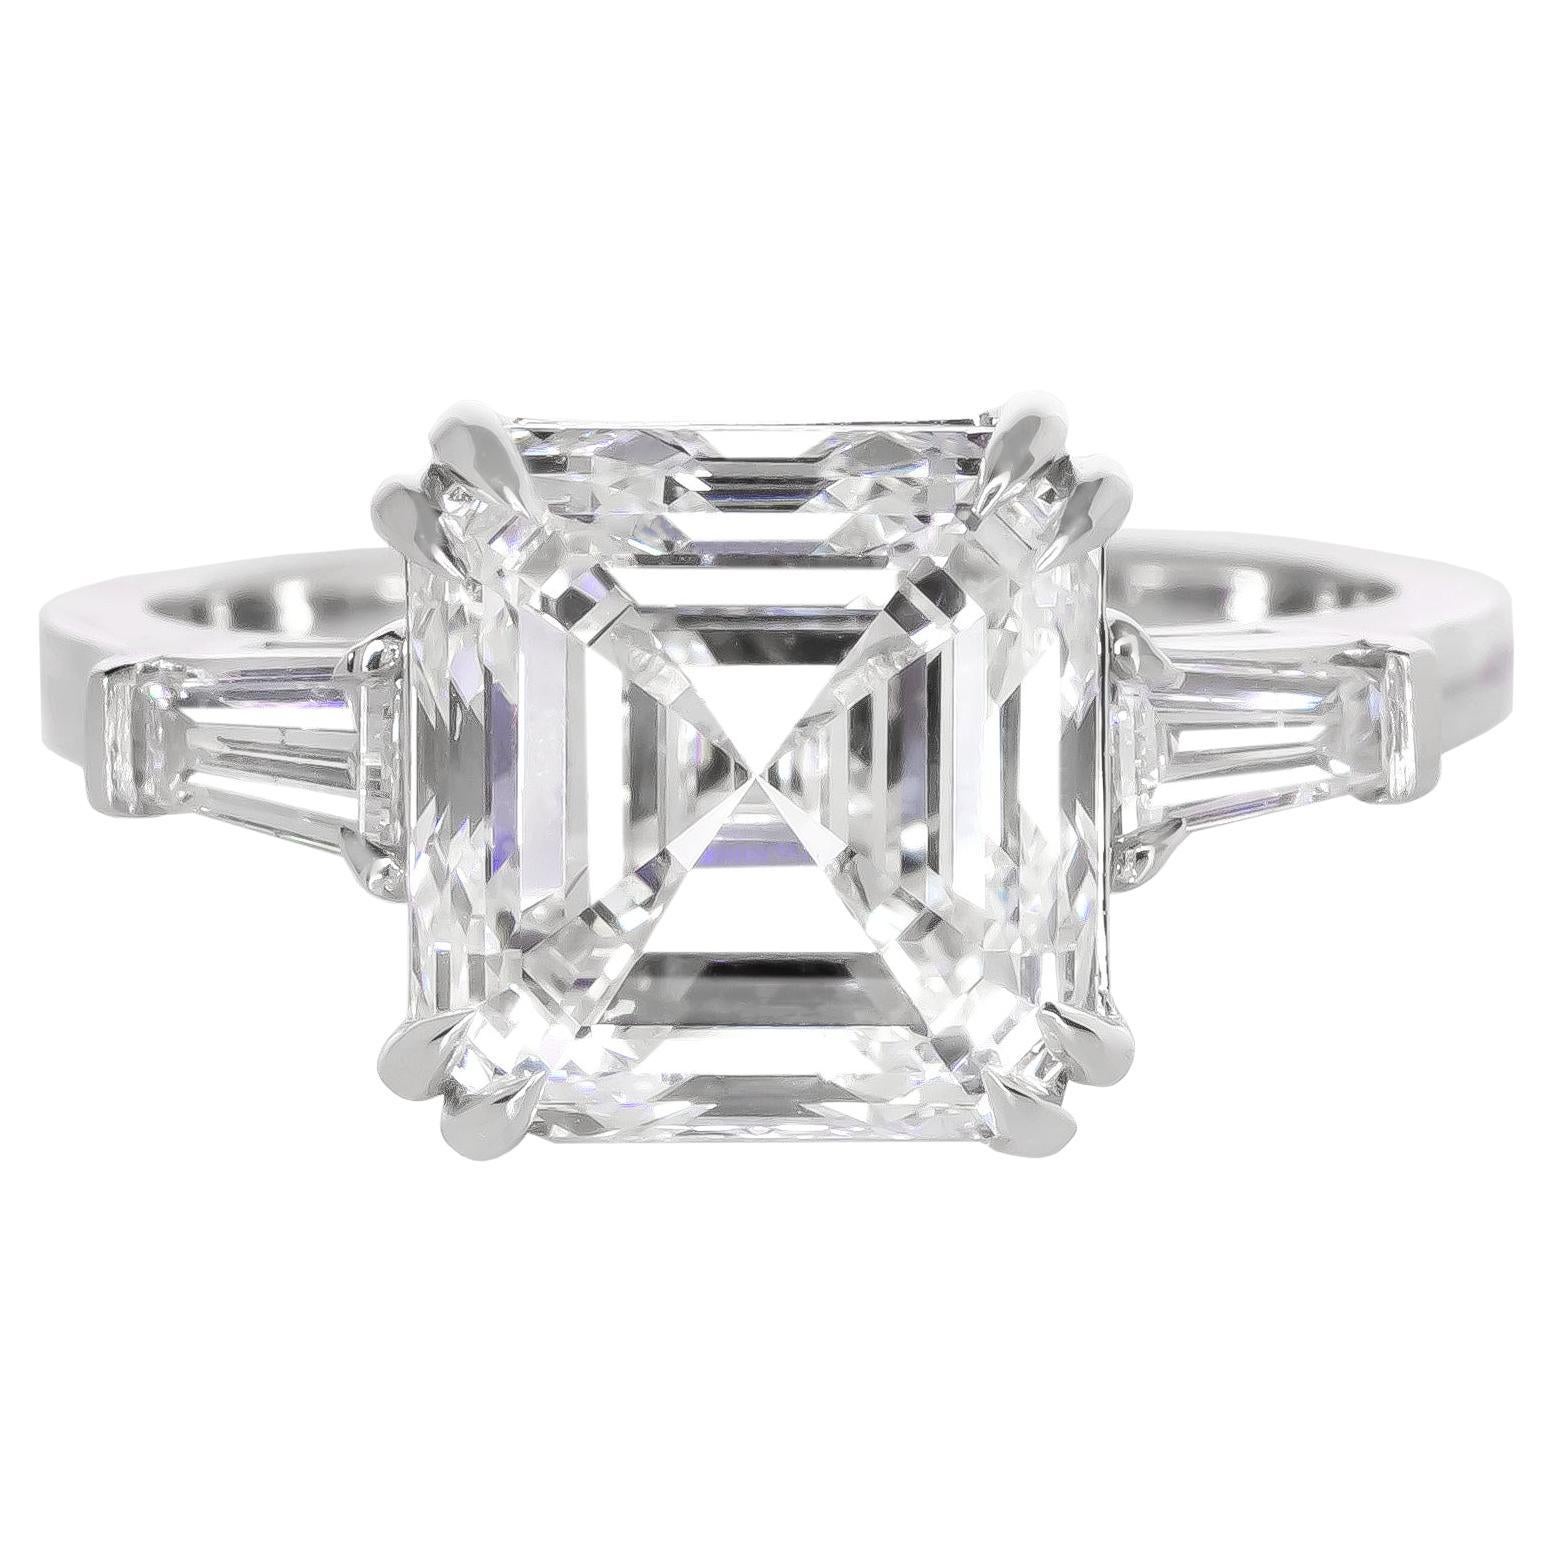 GIA Certified 4 Carat Asscher Cut Diamond Engagement 18K White Gold Ring  For Sale